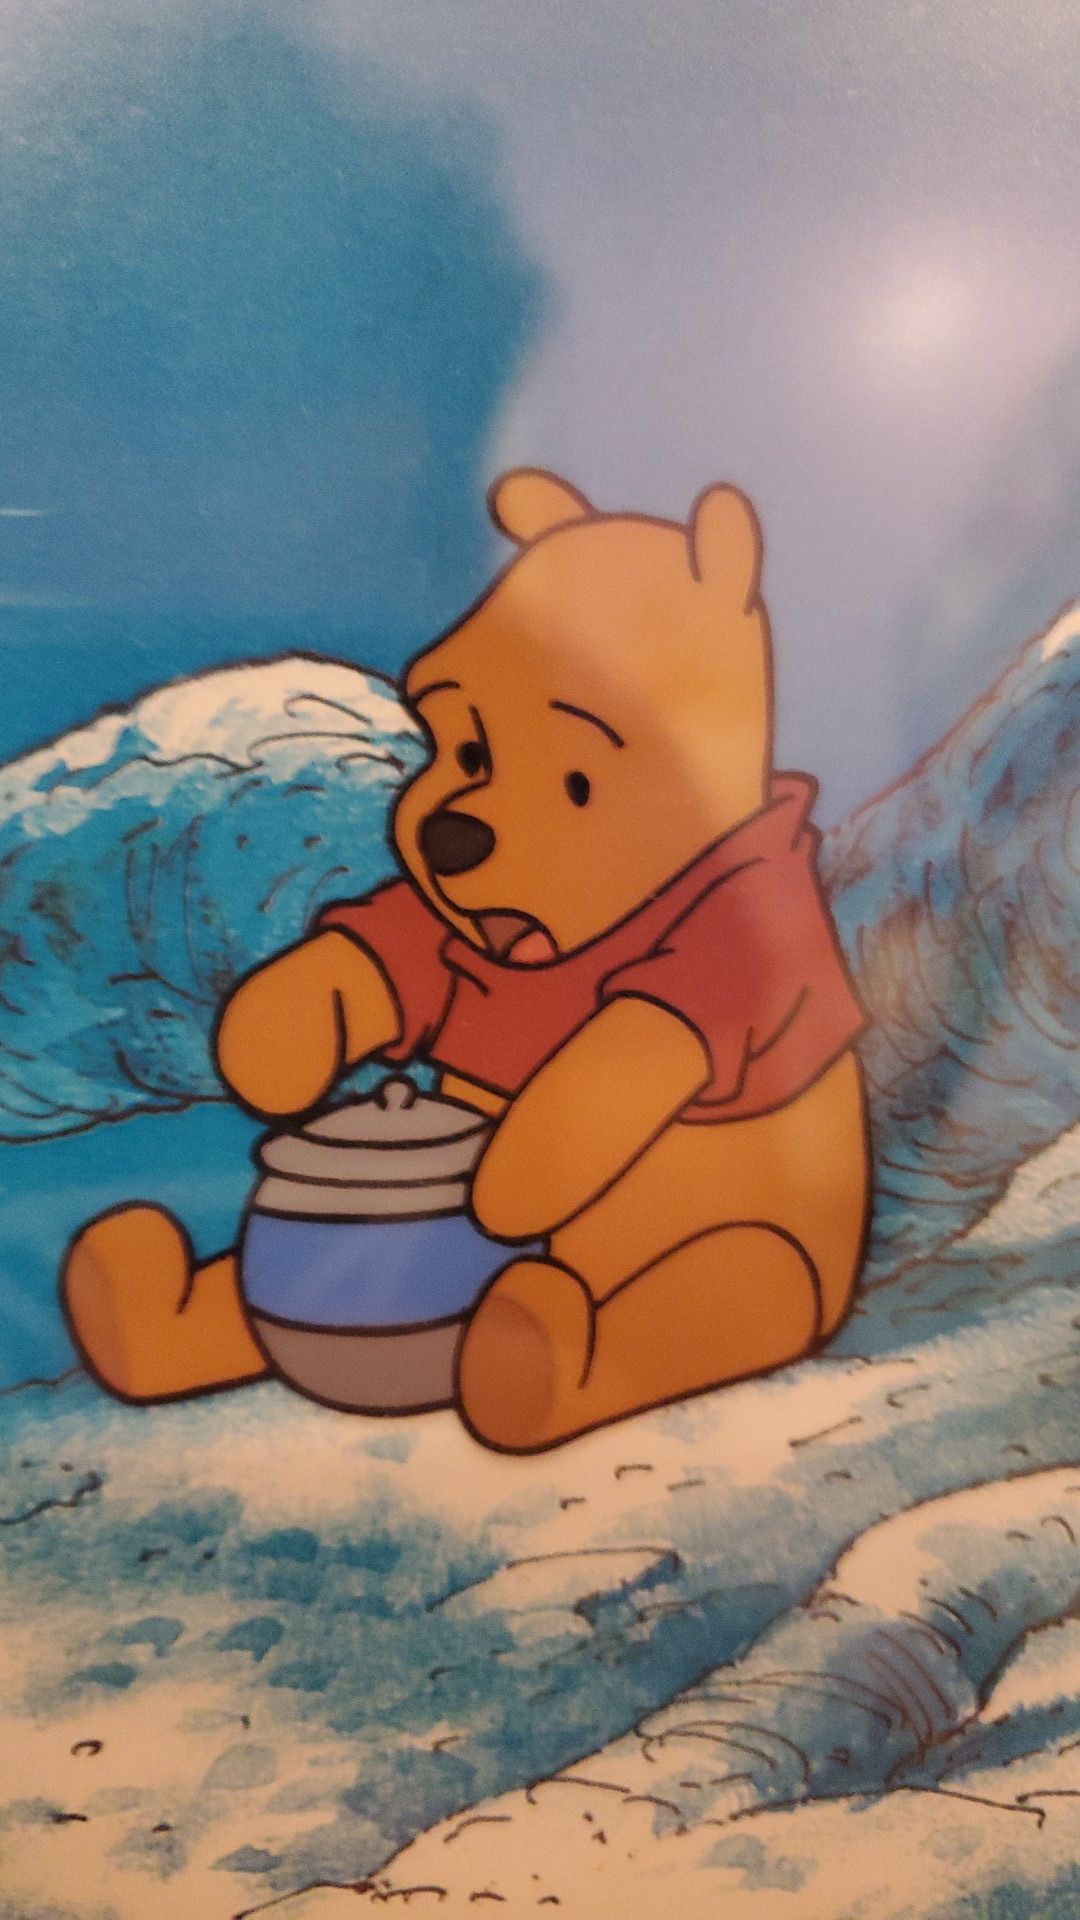 Disney Studios, Pooh's Grand Adventure - The Search for Christopher Robinalt Disney Animation Art Winnie the Pooh cell